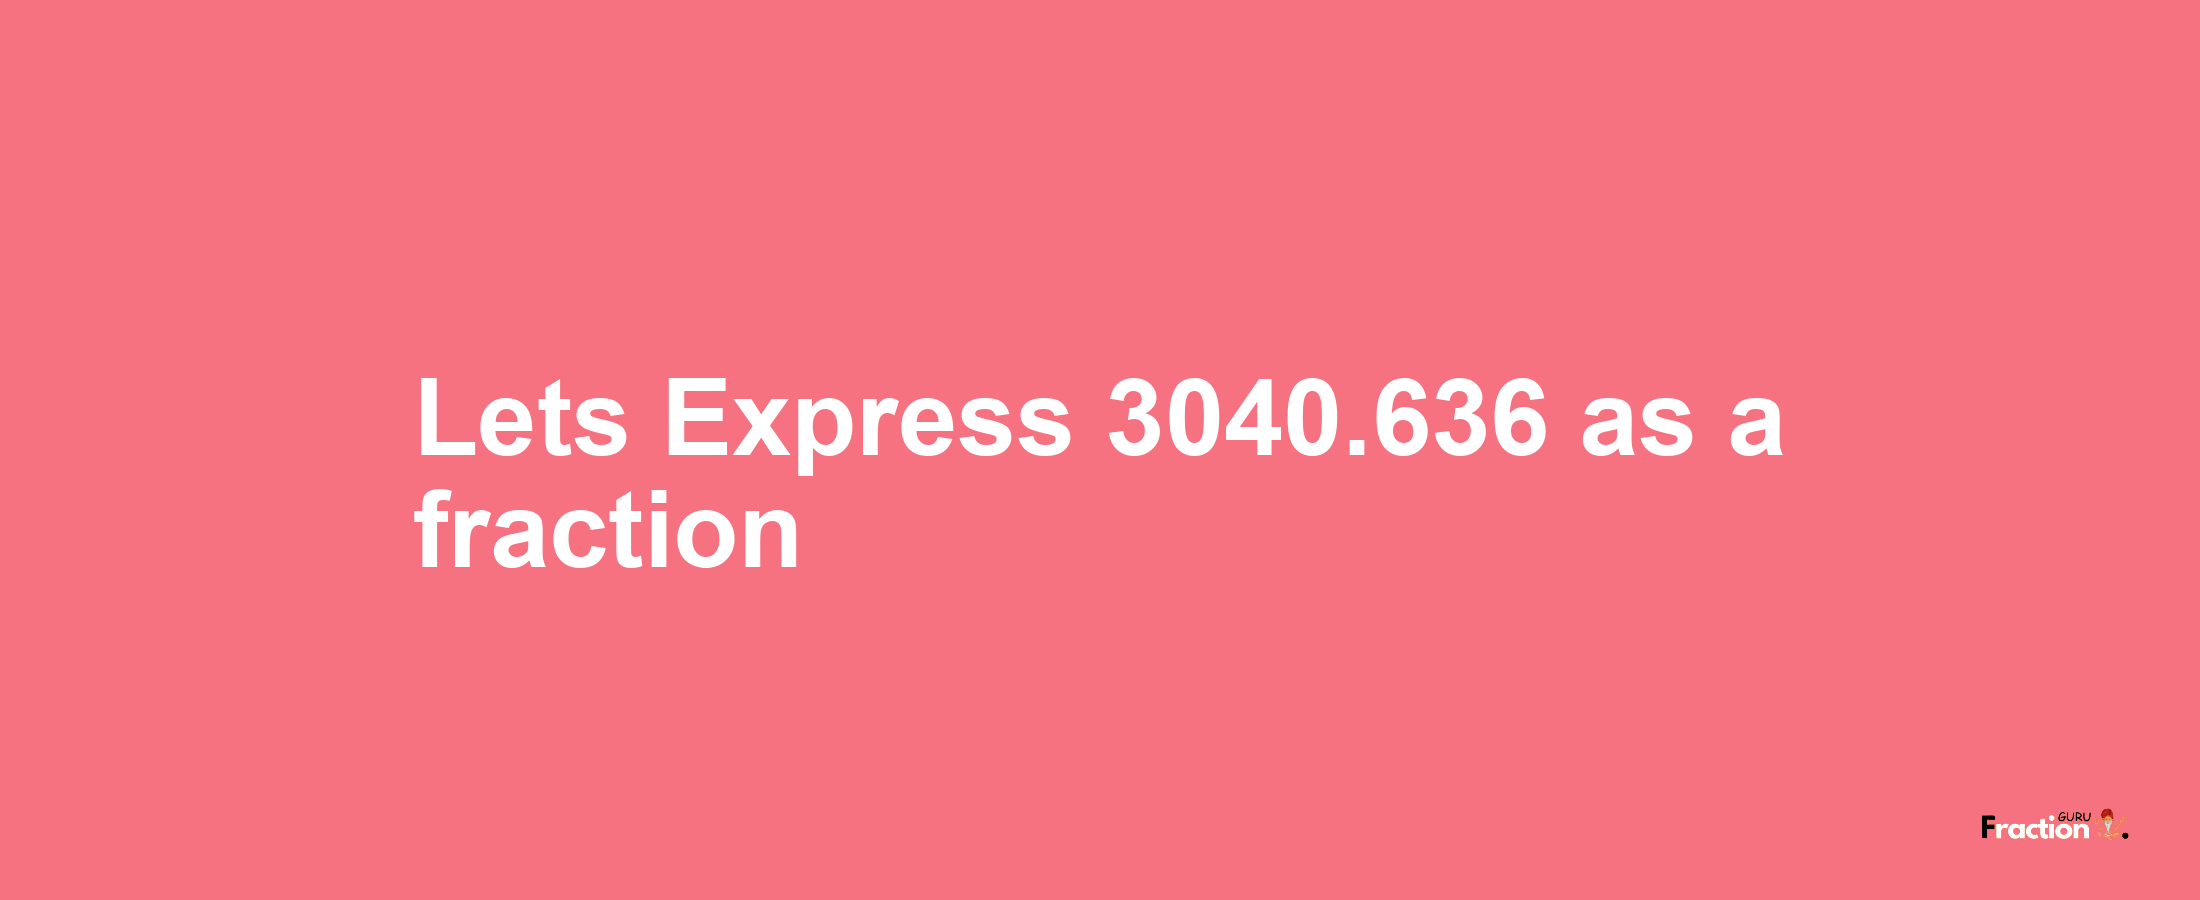 Lets Express 3040.636 as afraction